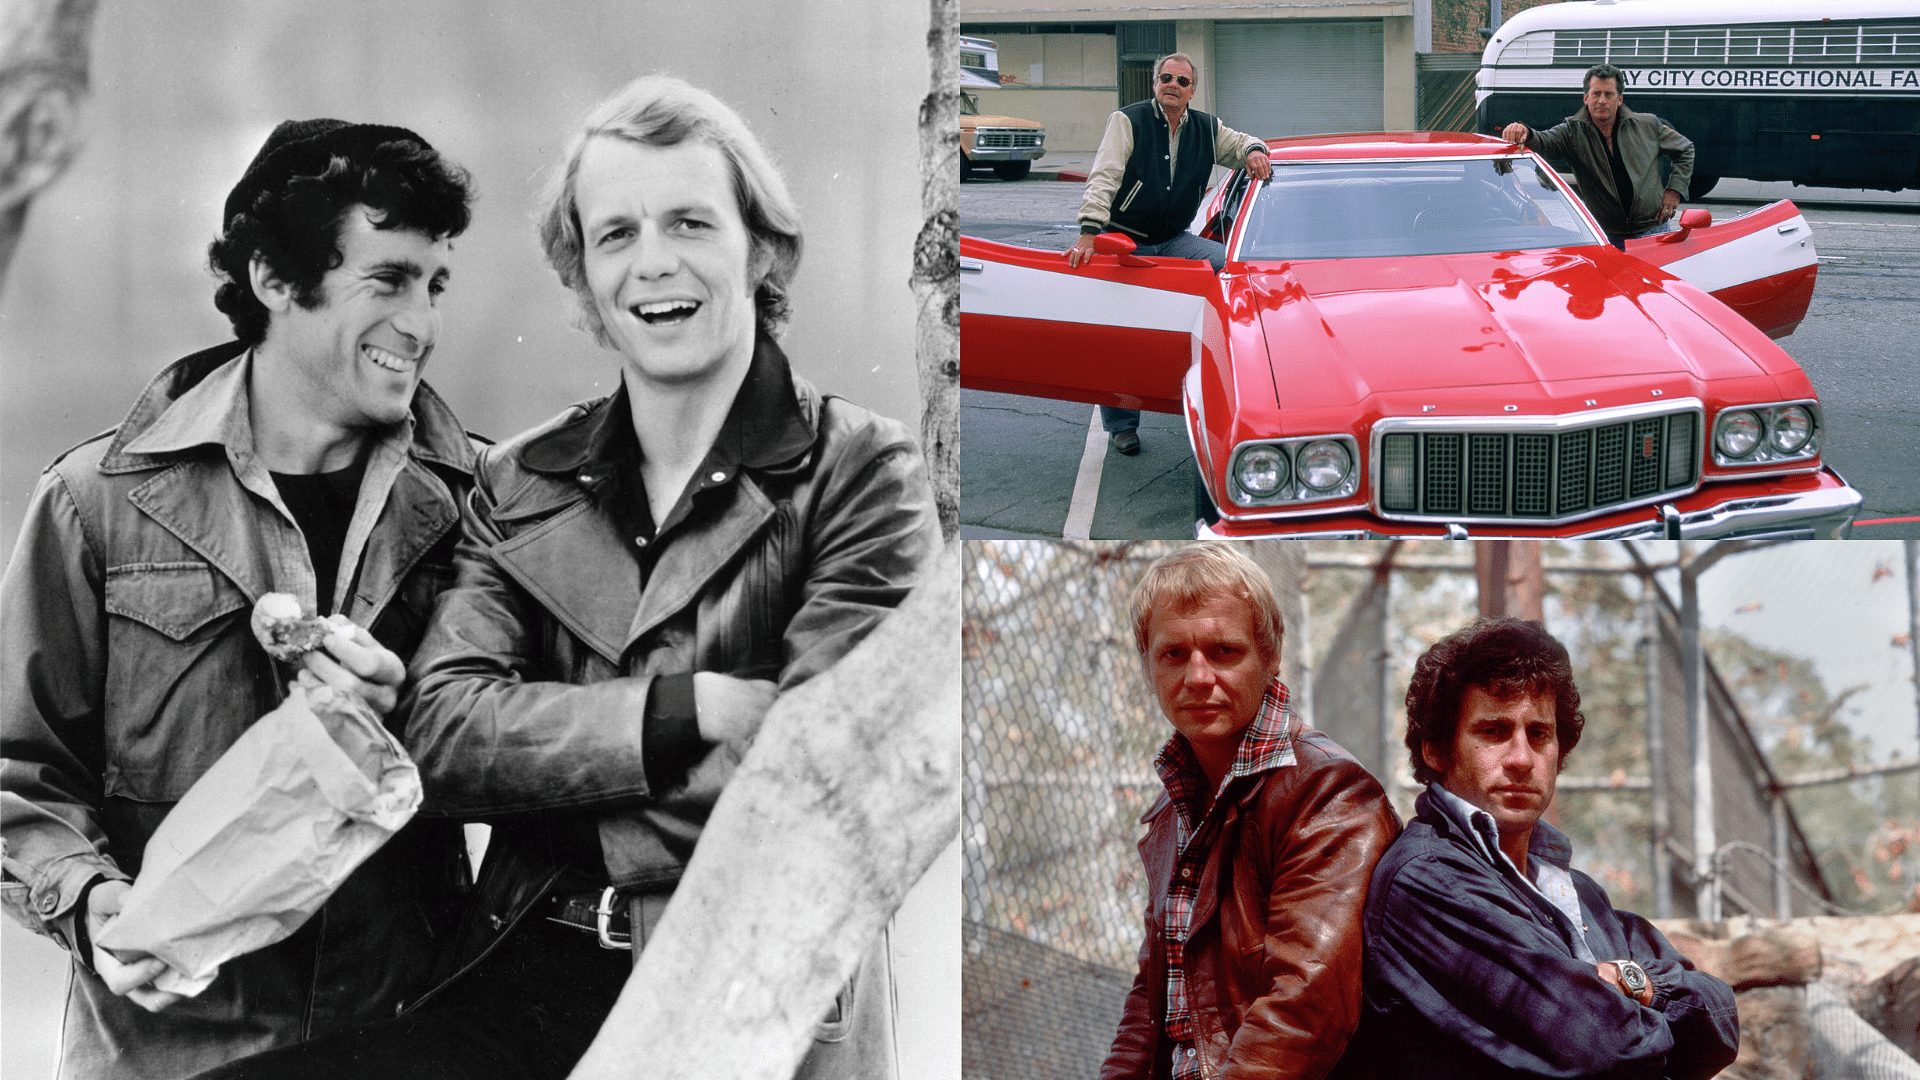 Starky and Hutch, Bright Red Ford Torino